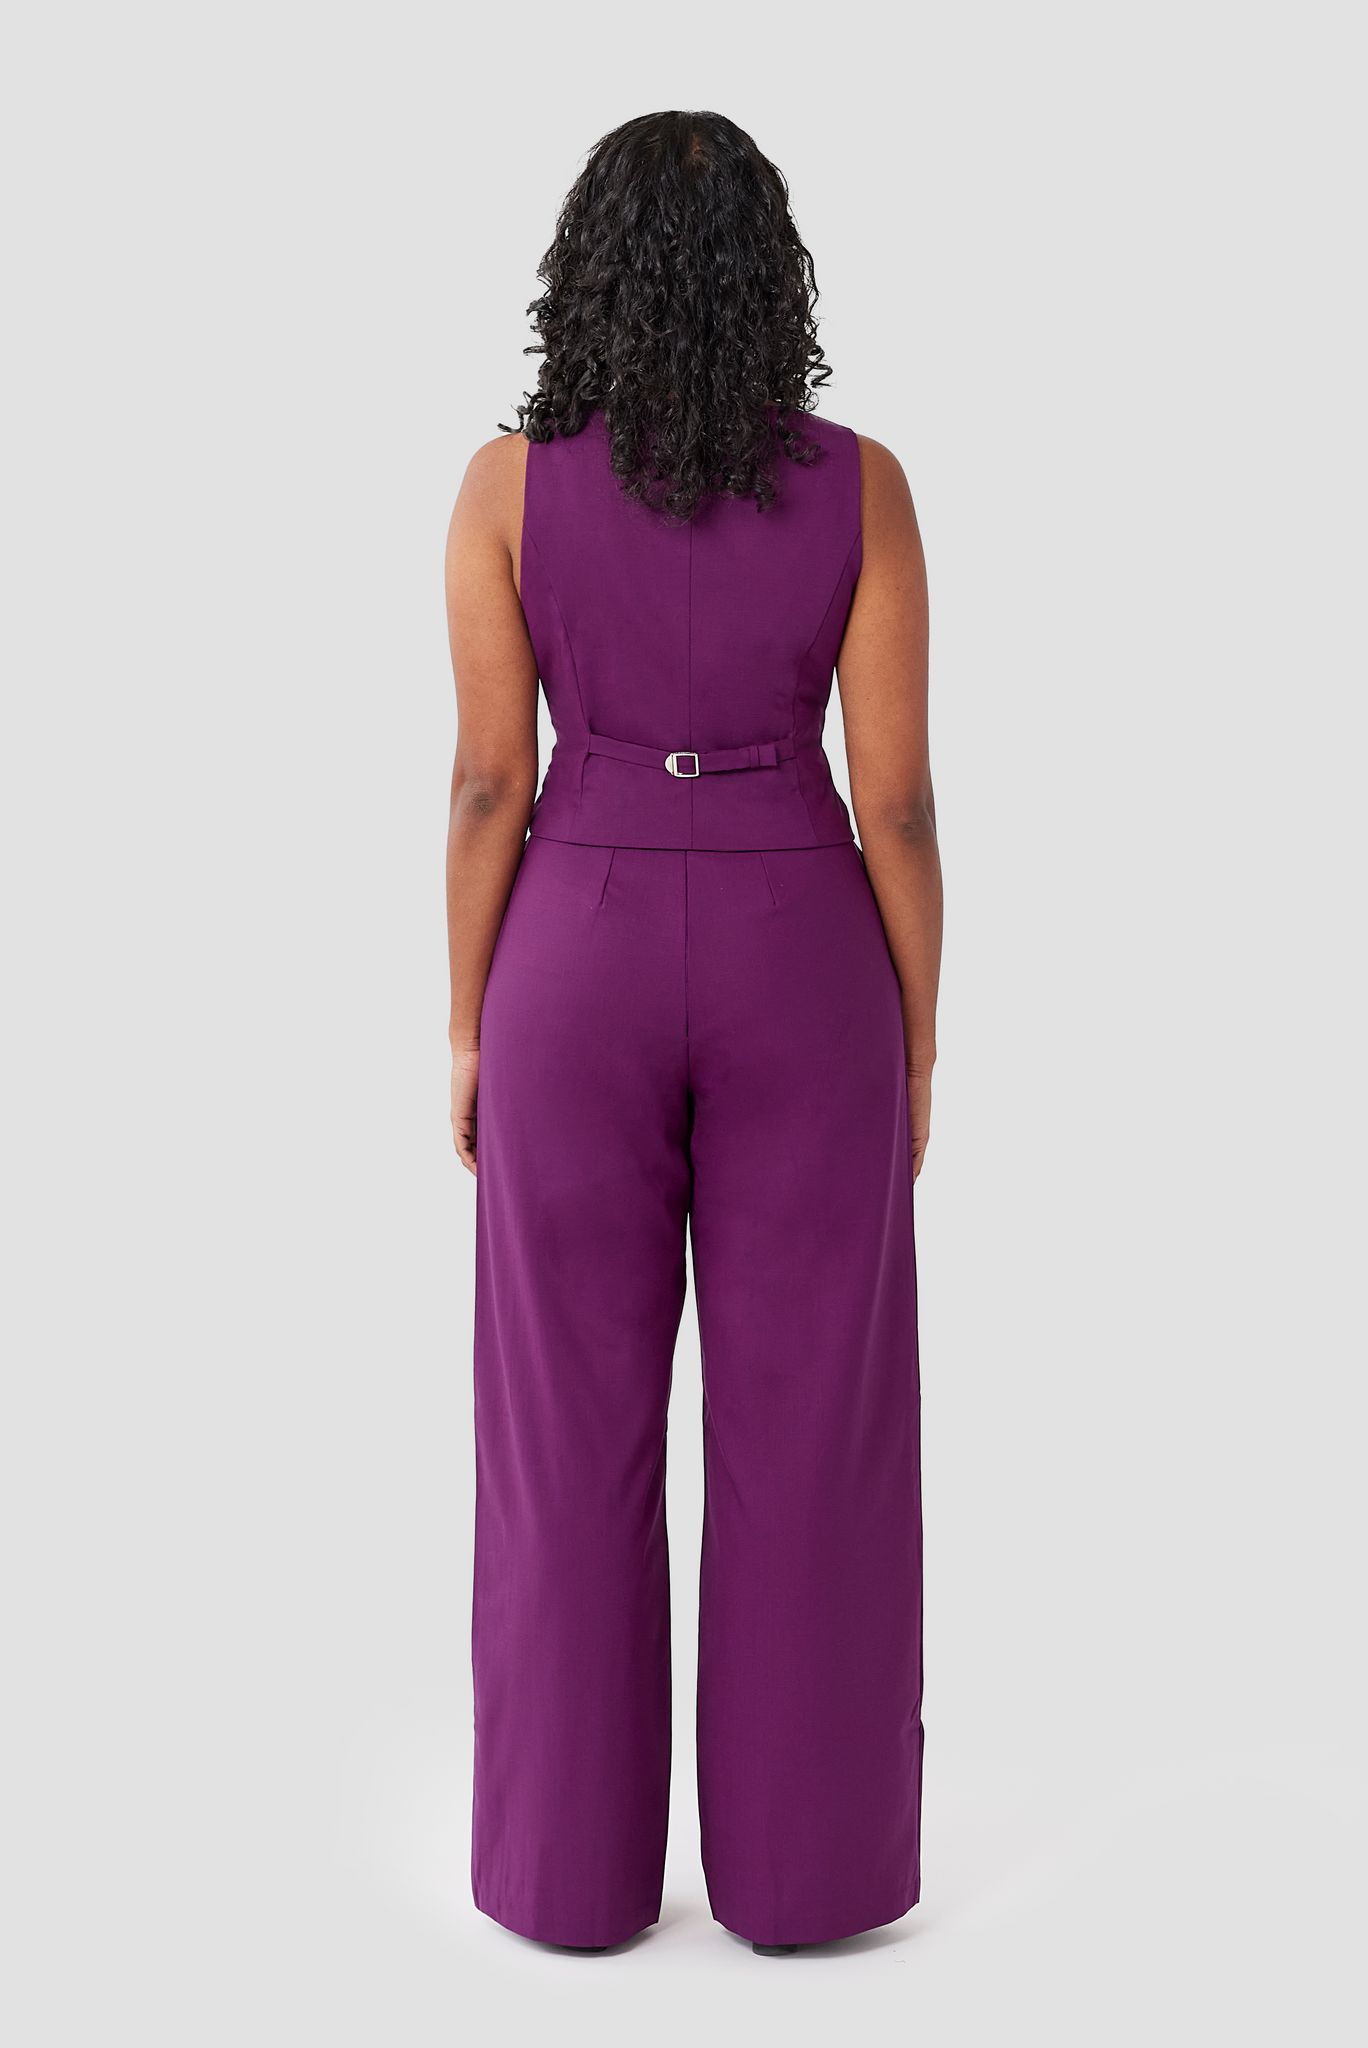 The Wool Wide Leg Pant is designed to sit snug at the high waist with plenty of room for curvy bottom shapes. The pant has a comfortable, boho fit on women with full hips and thighs. No more waist gaps or uncomfortable belts required.